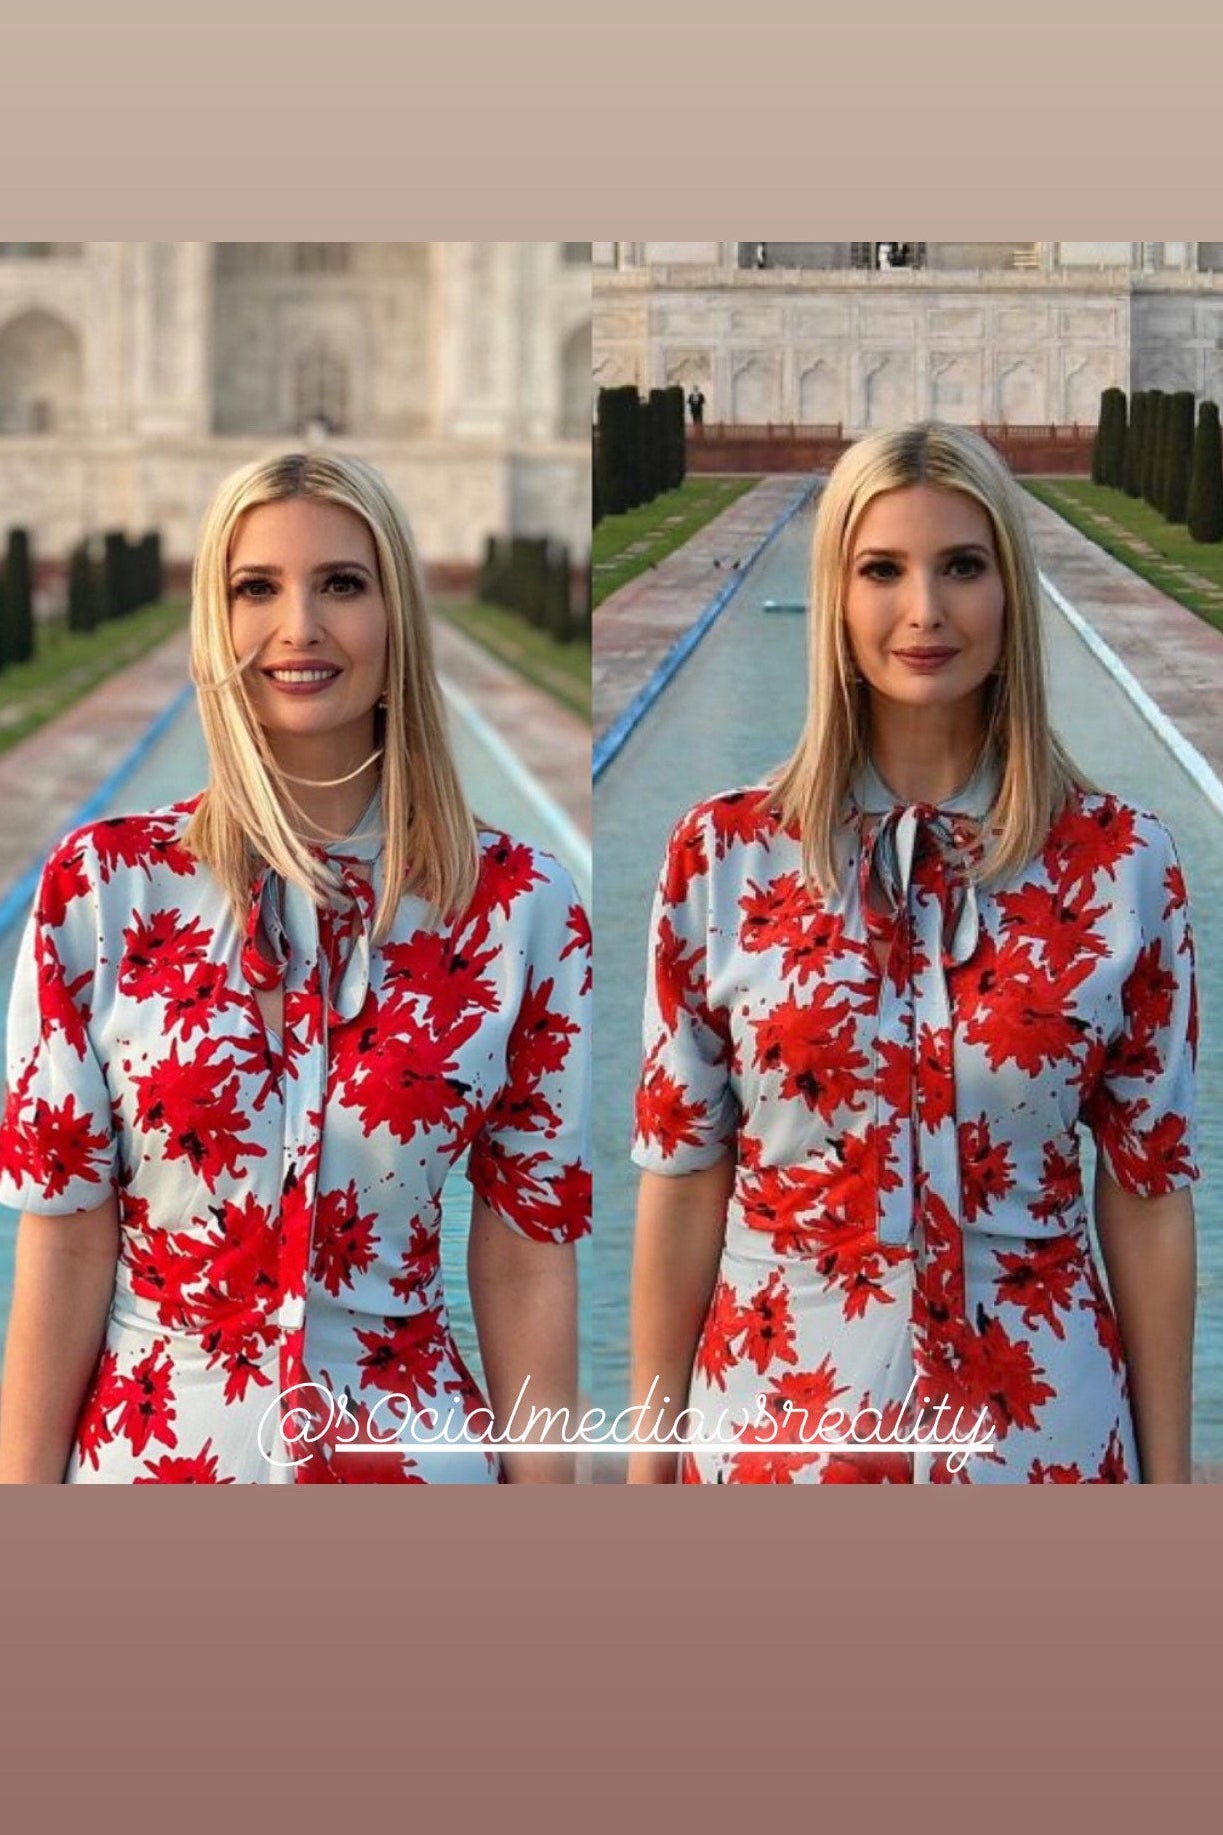 The Instagram photo of Ivanka shows a large gap between her arm and waist. The photo to the right does not.